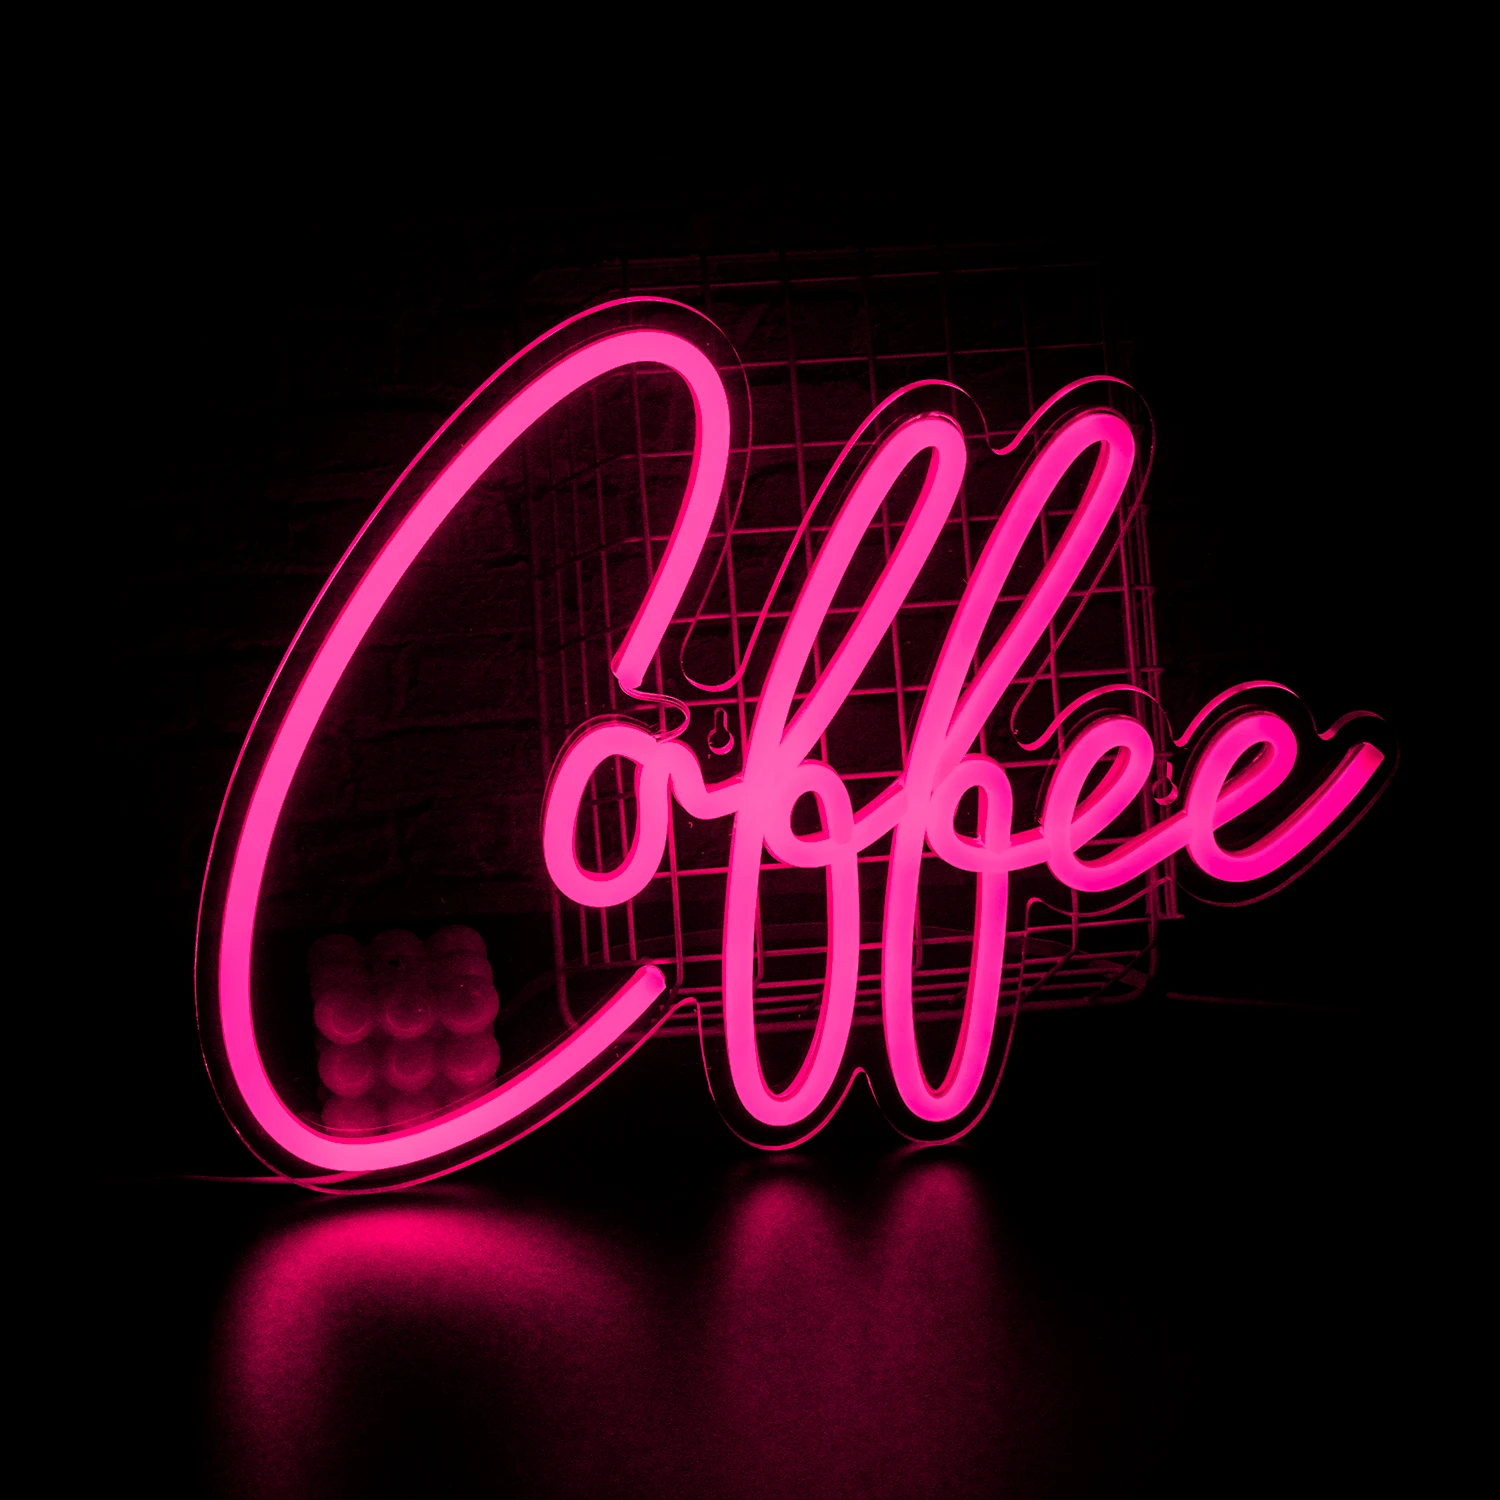 Coffee Neon sign LED light  scene Shop Home Art For wall decoration Dining  room party ART personalized neon signs gift lamps